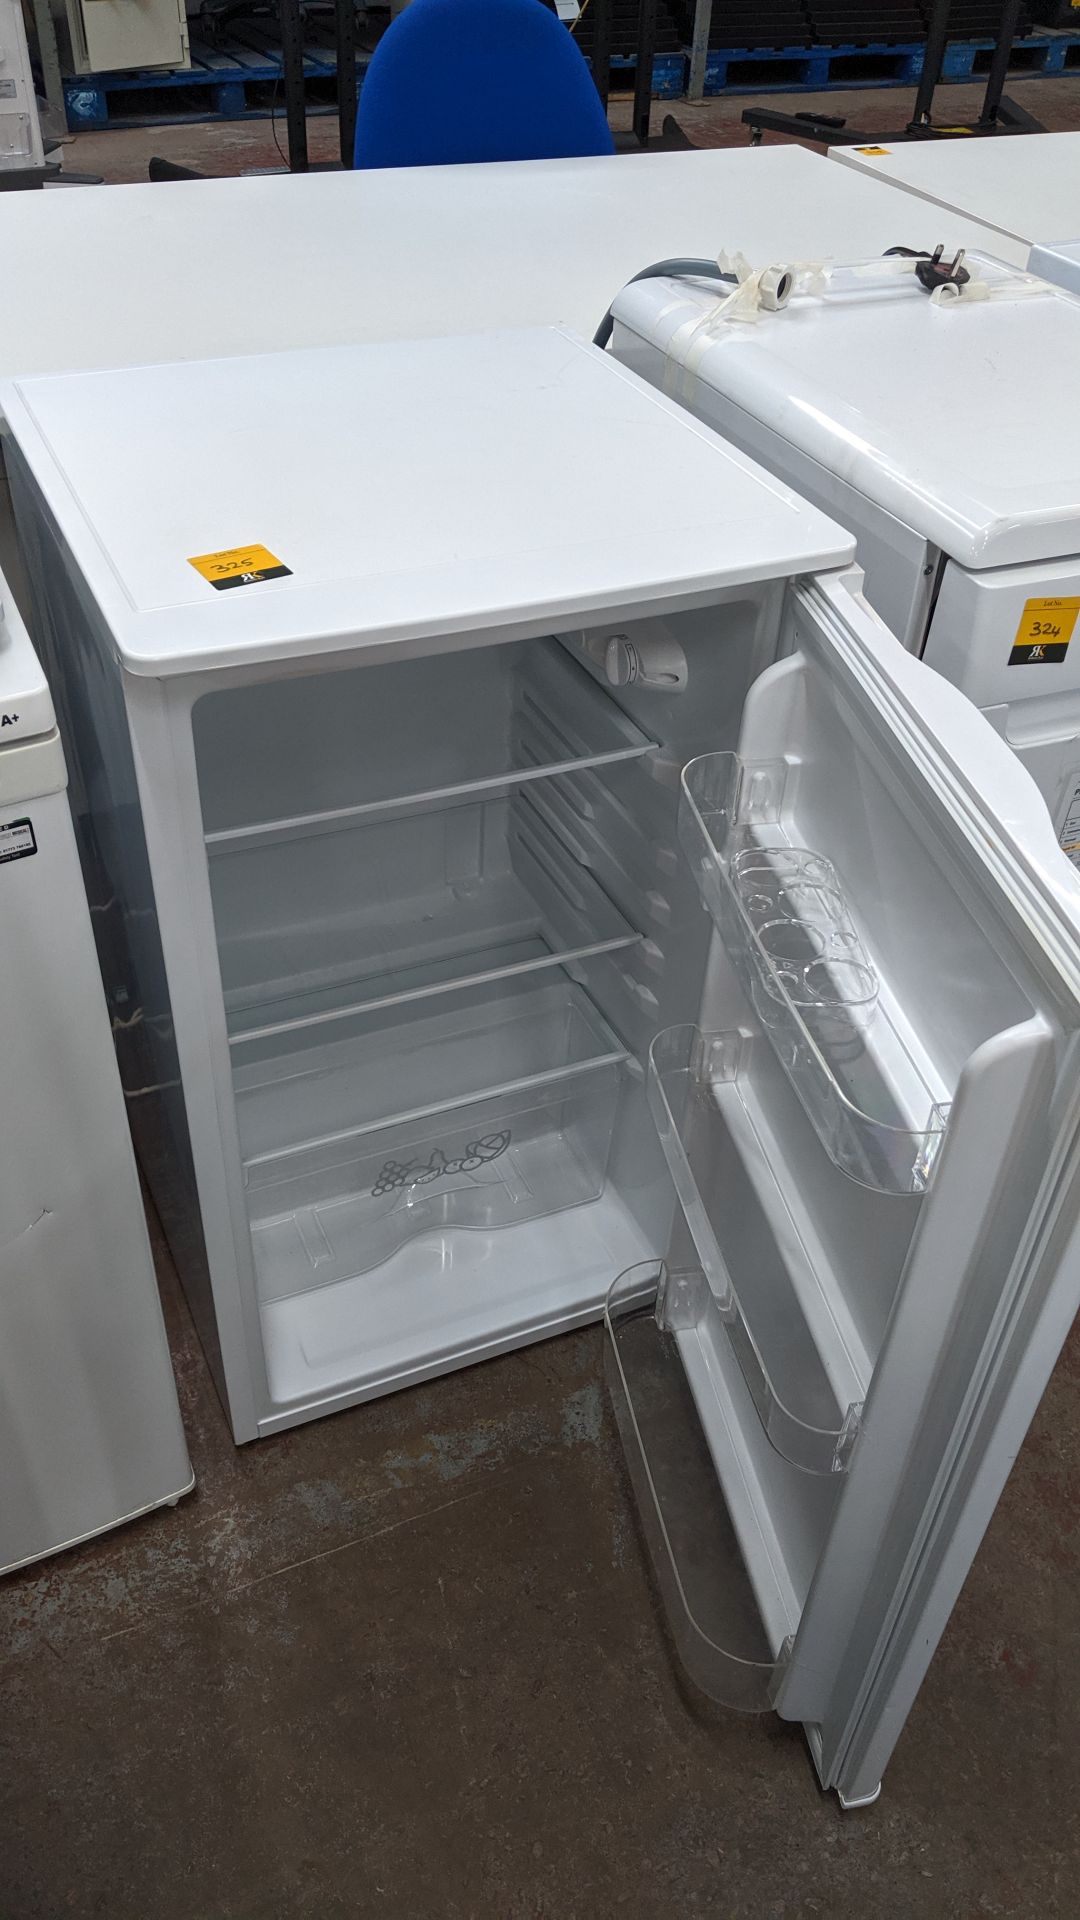 Zanussi undercounter fridge. This is one of a large number of lots used/owned by One To One (North - Image 3 of 4